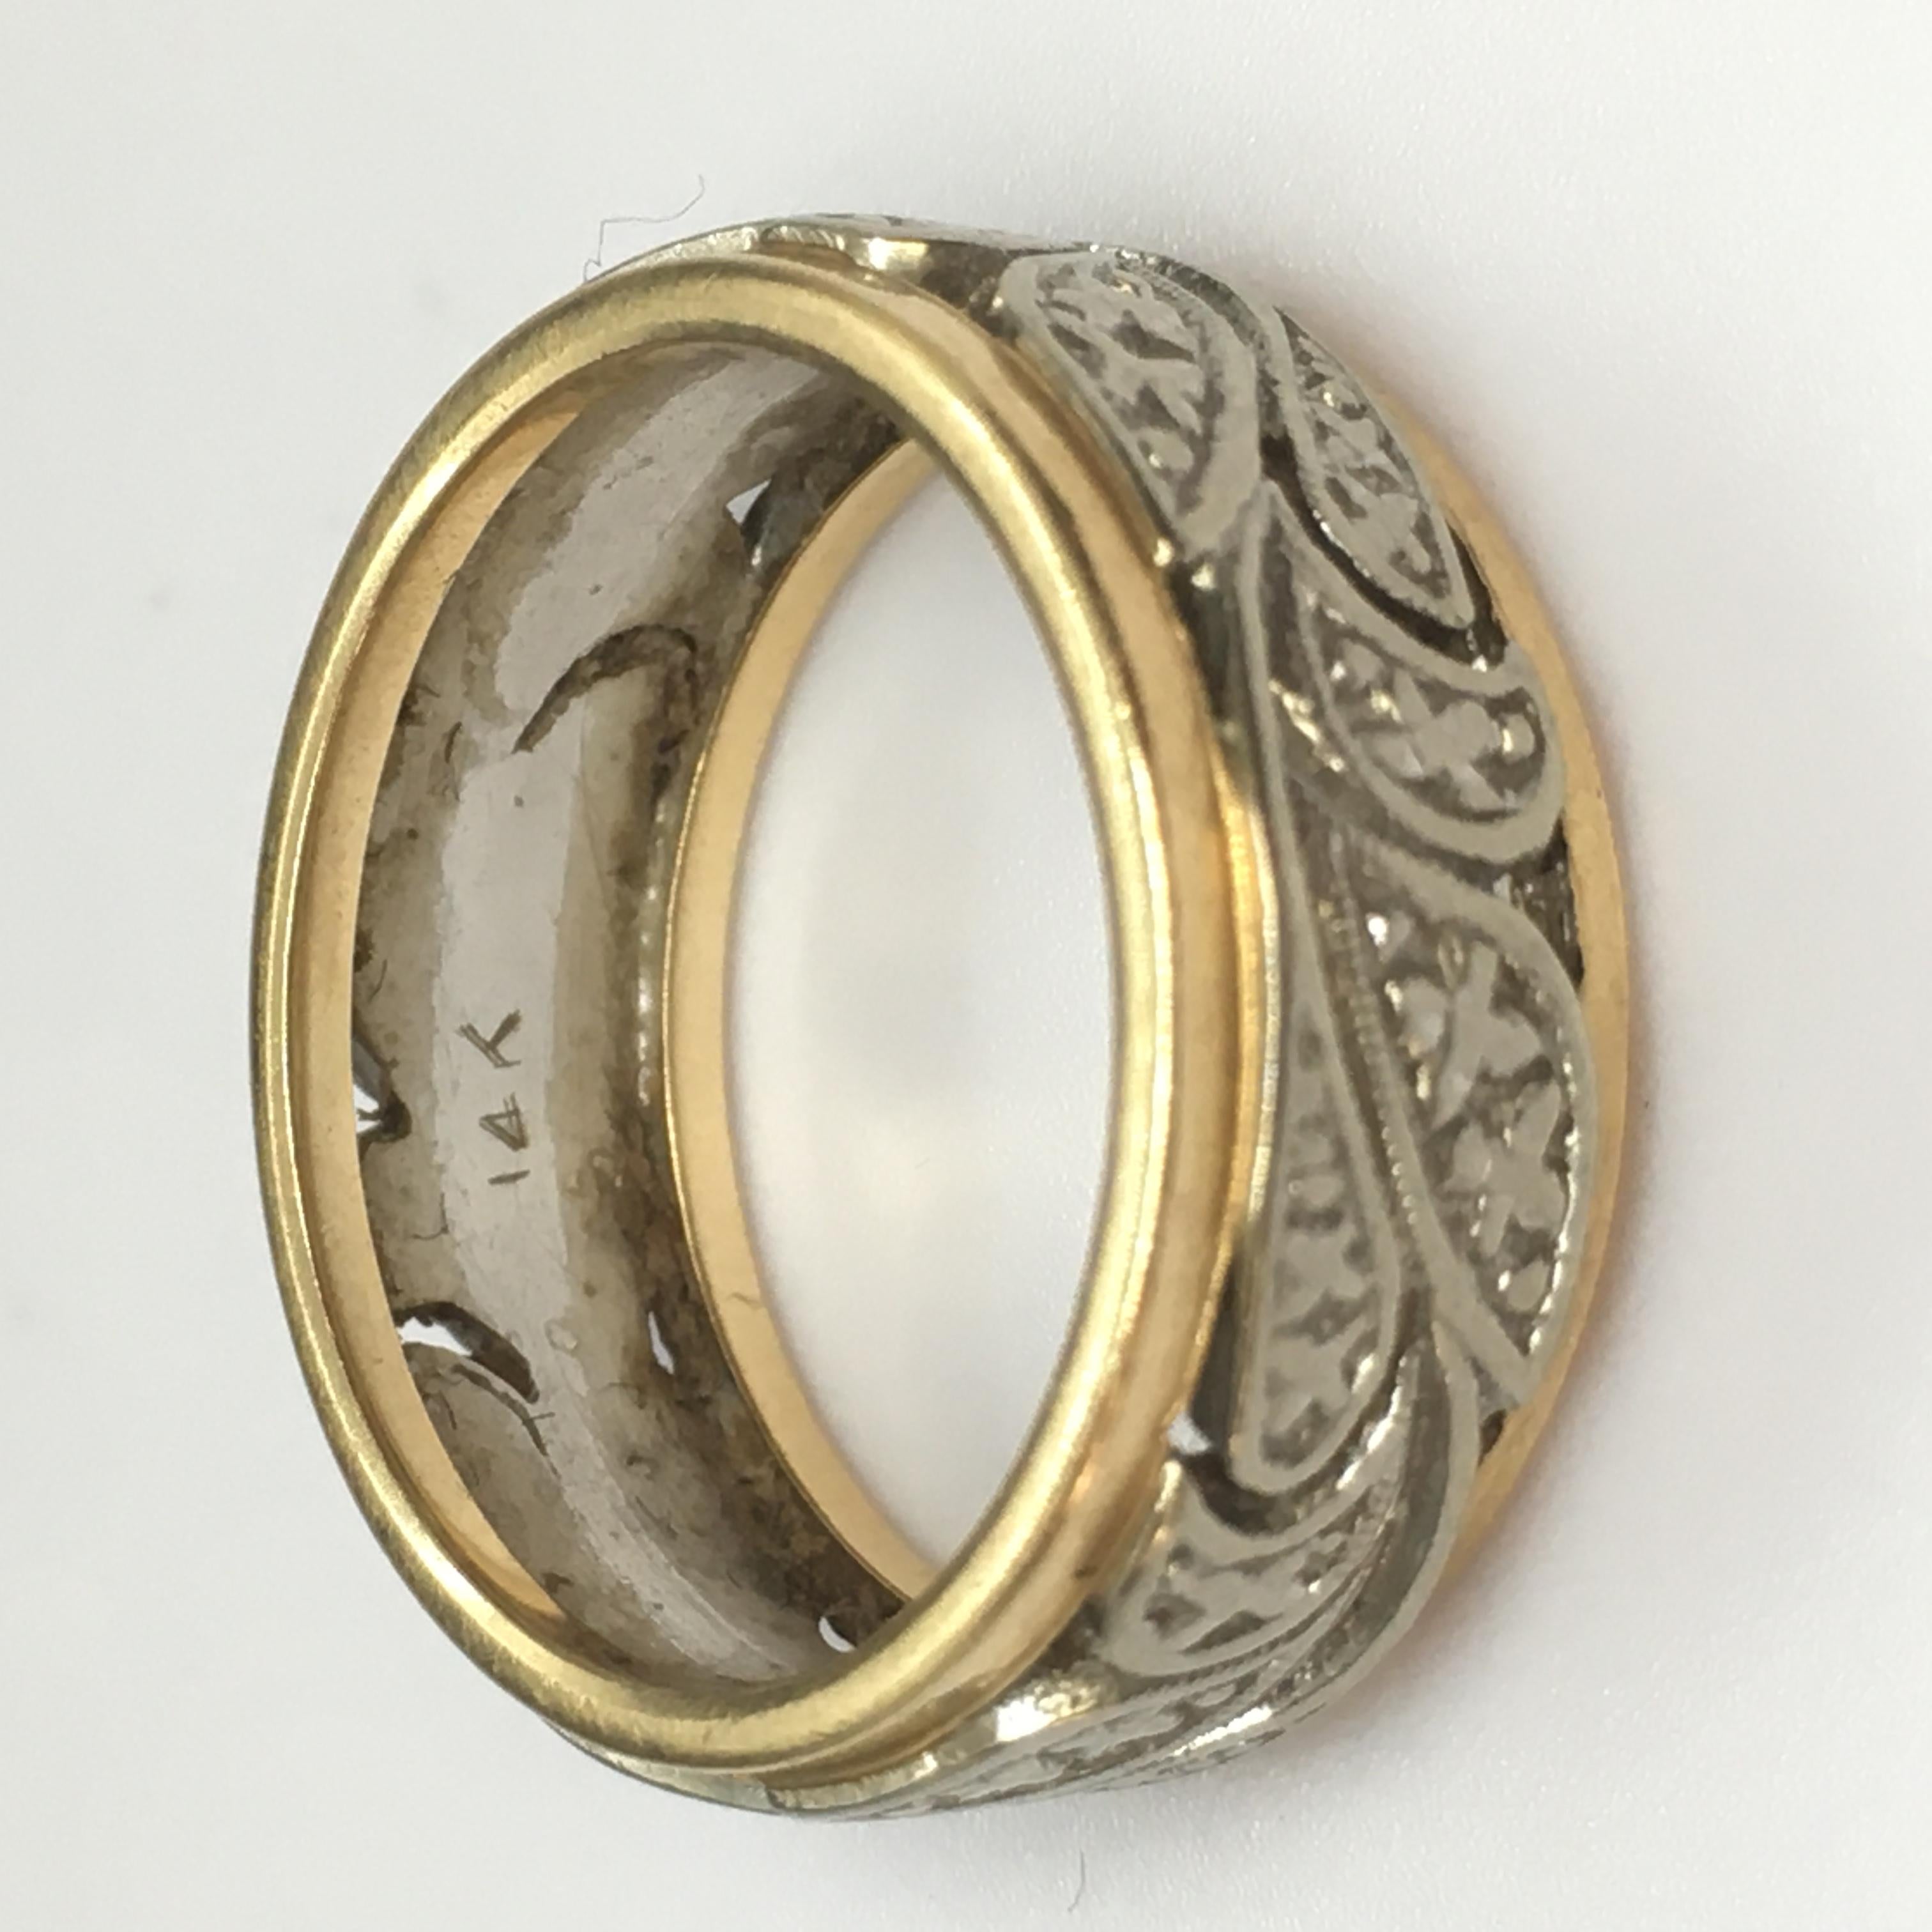 14K GOLD Two tone FLOWER Design BAND RING Size 6.25 Floral Pattern 1930s Deco 


Marked 14K
5.7 Gram
Size 6.25
1930s Art Deco American work 
7.5mm wide, stamped, minimal wear and tear, no evidence of repairs or sizing, see pictures   
Seller